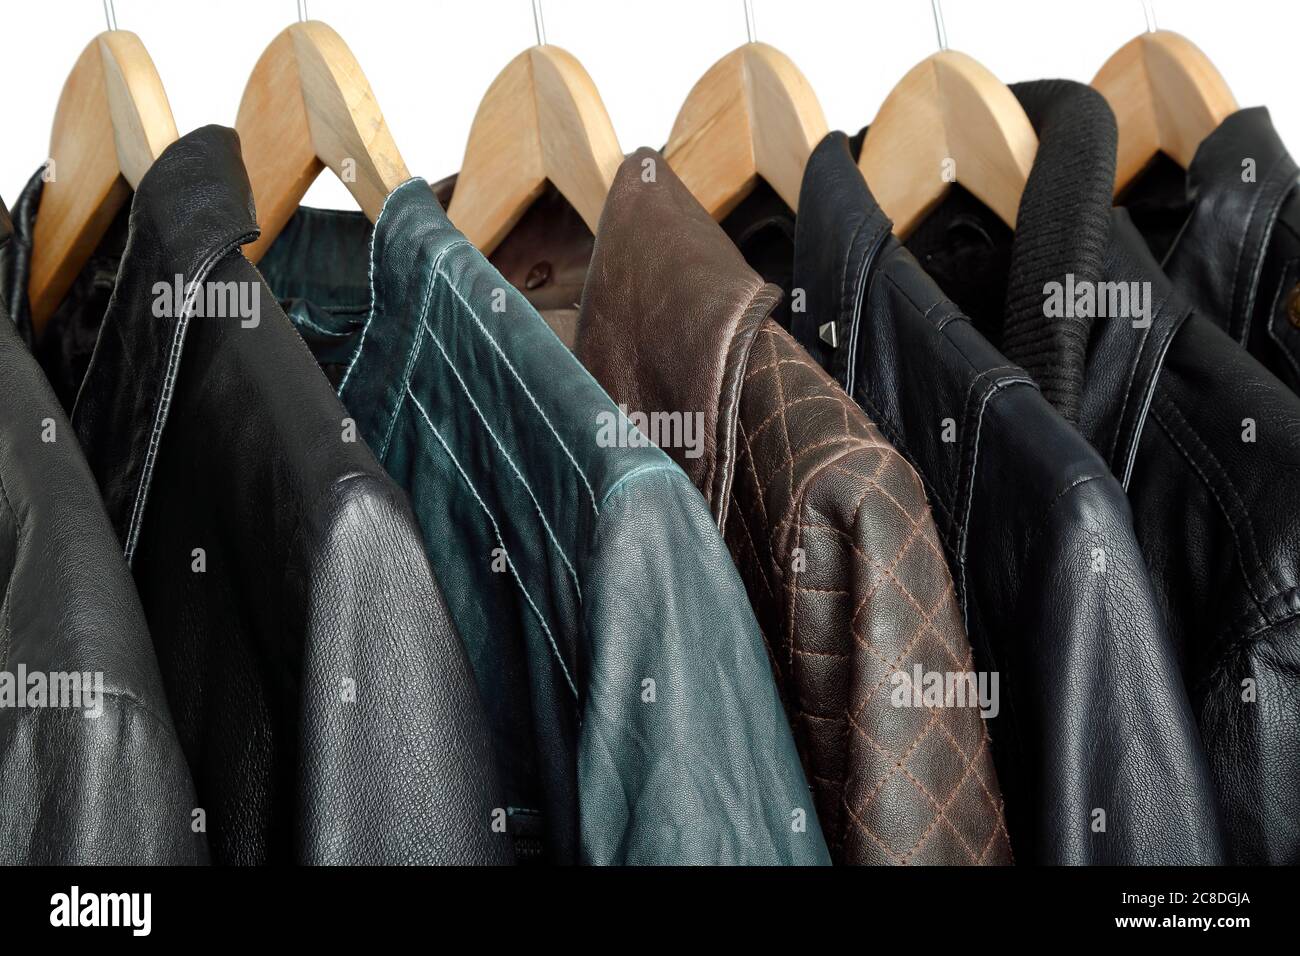 collection of leather jackets on hangers Stock Photo